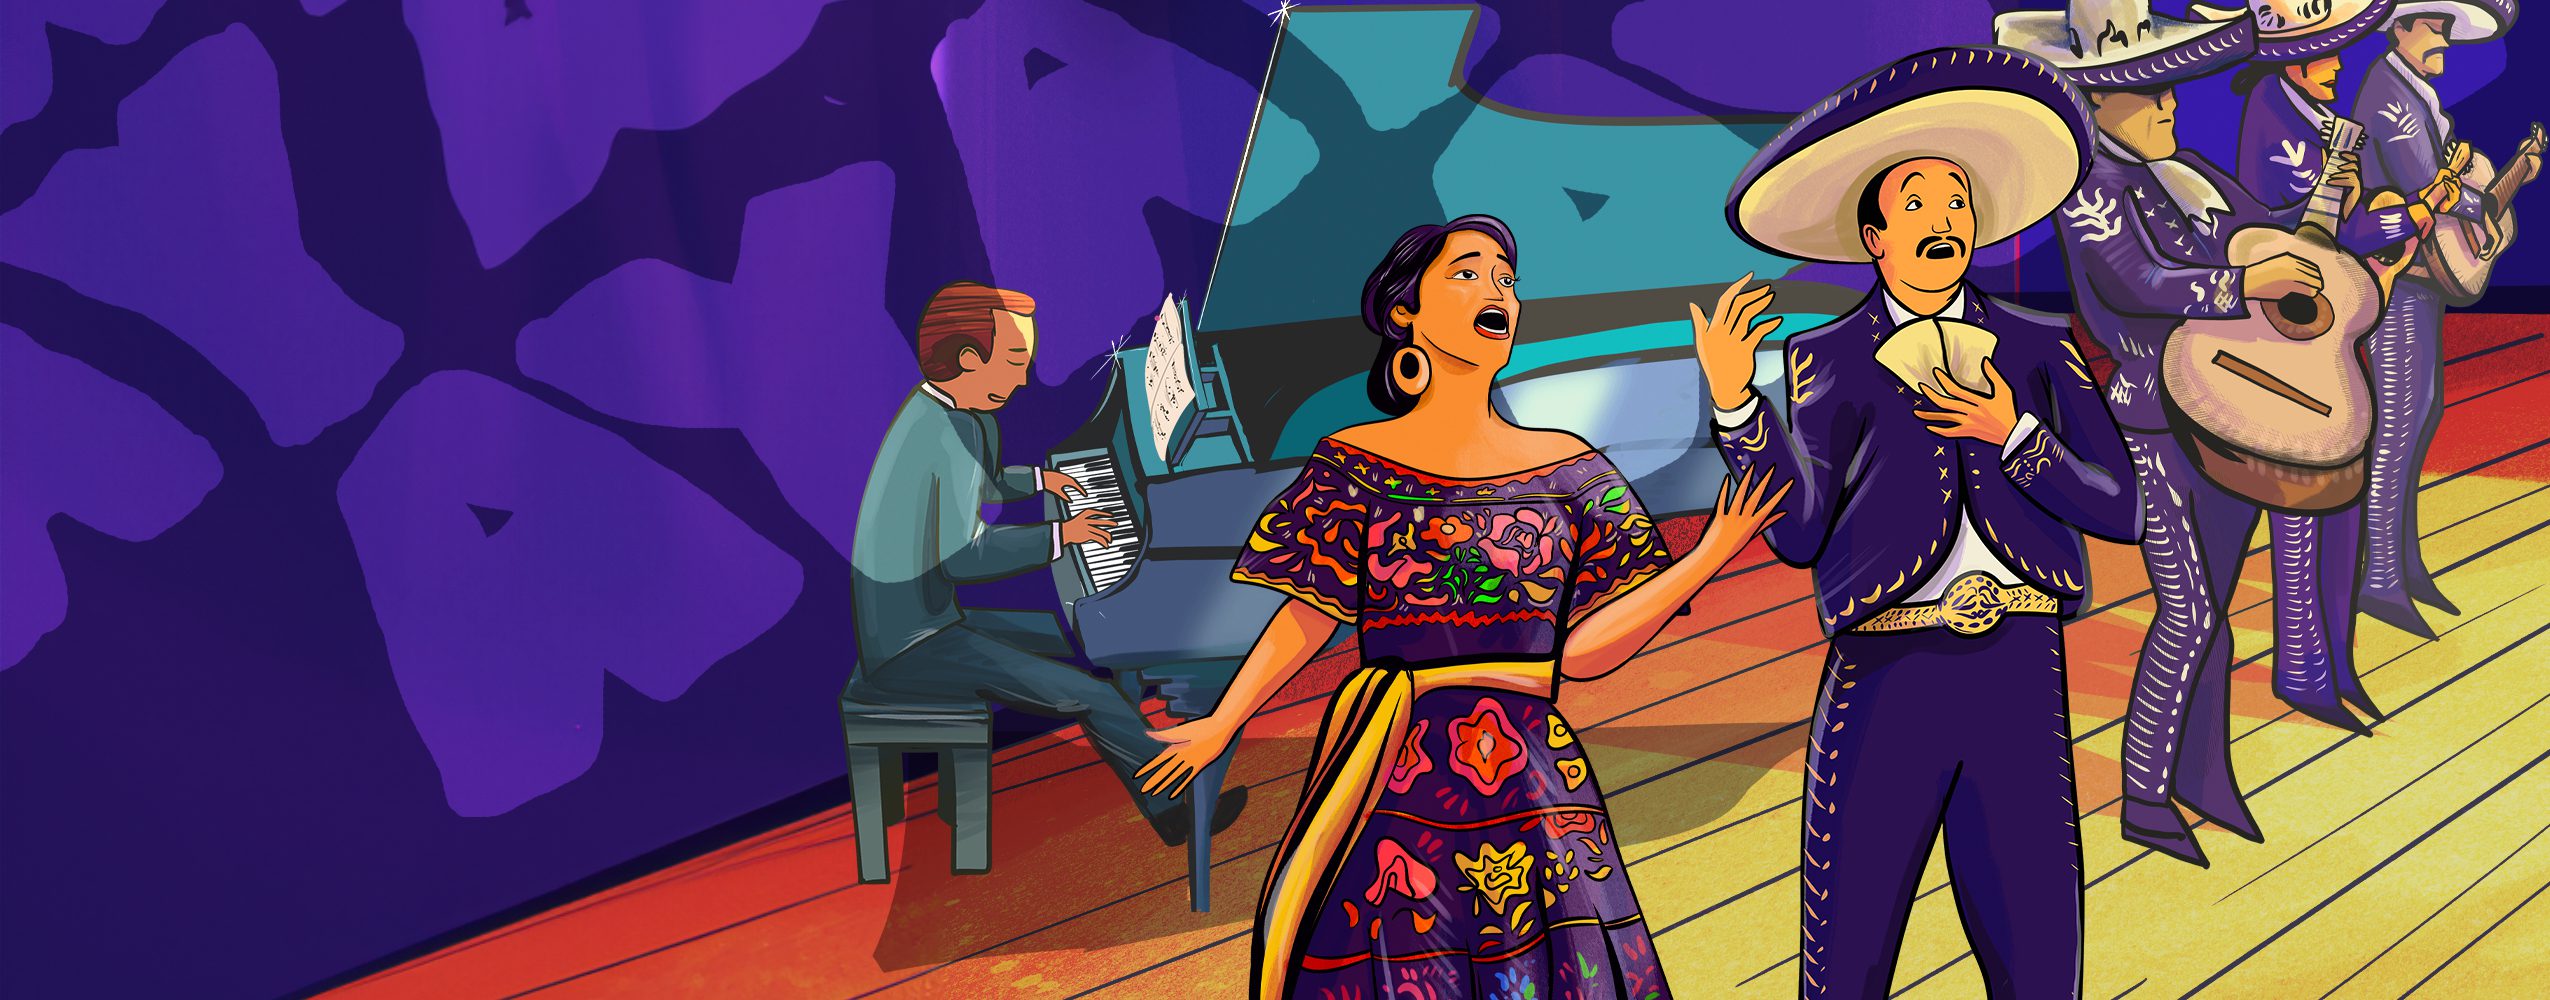 Opera Las Vegas poster for Celebracion Latina. An illustration of a woman singer in a traditional Mexican dress sings alongside a Mariachi band on a well-lit stage.